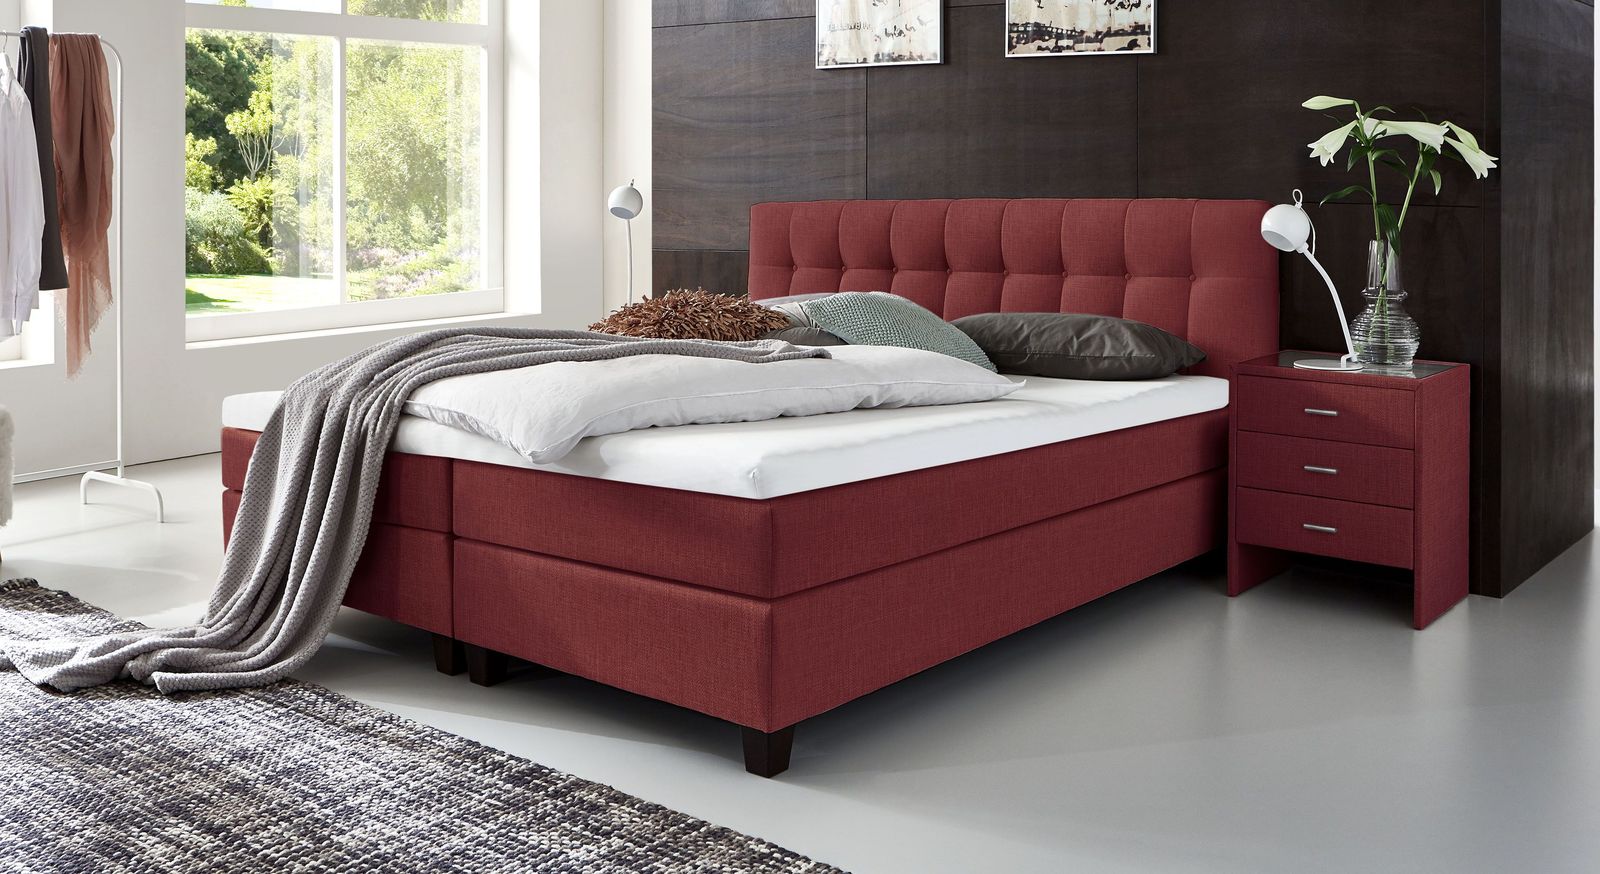 53 cm hohes Boxspringbett Luciano aus meliertem Webstoff in Rot